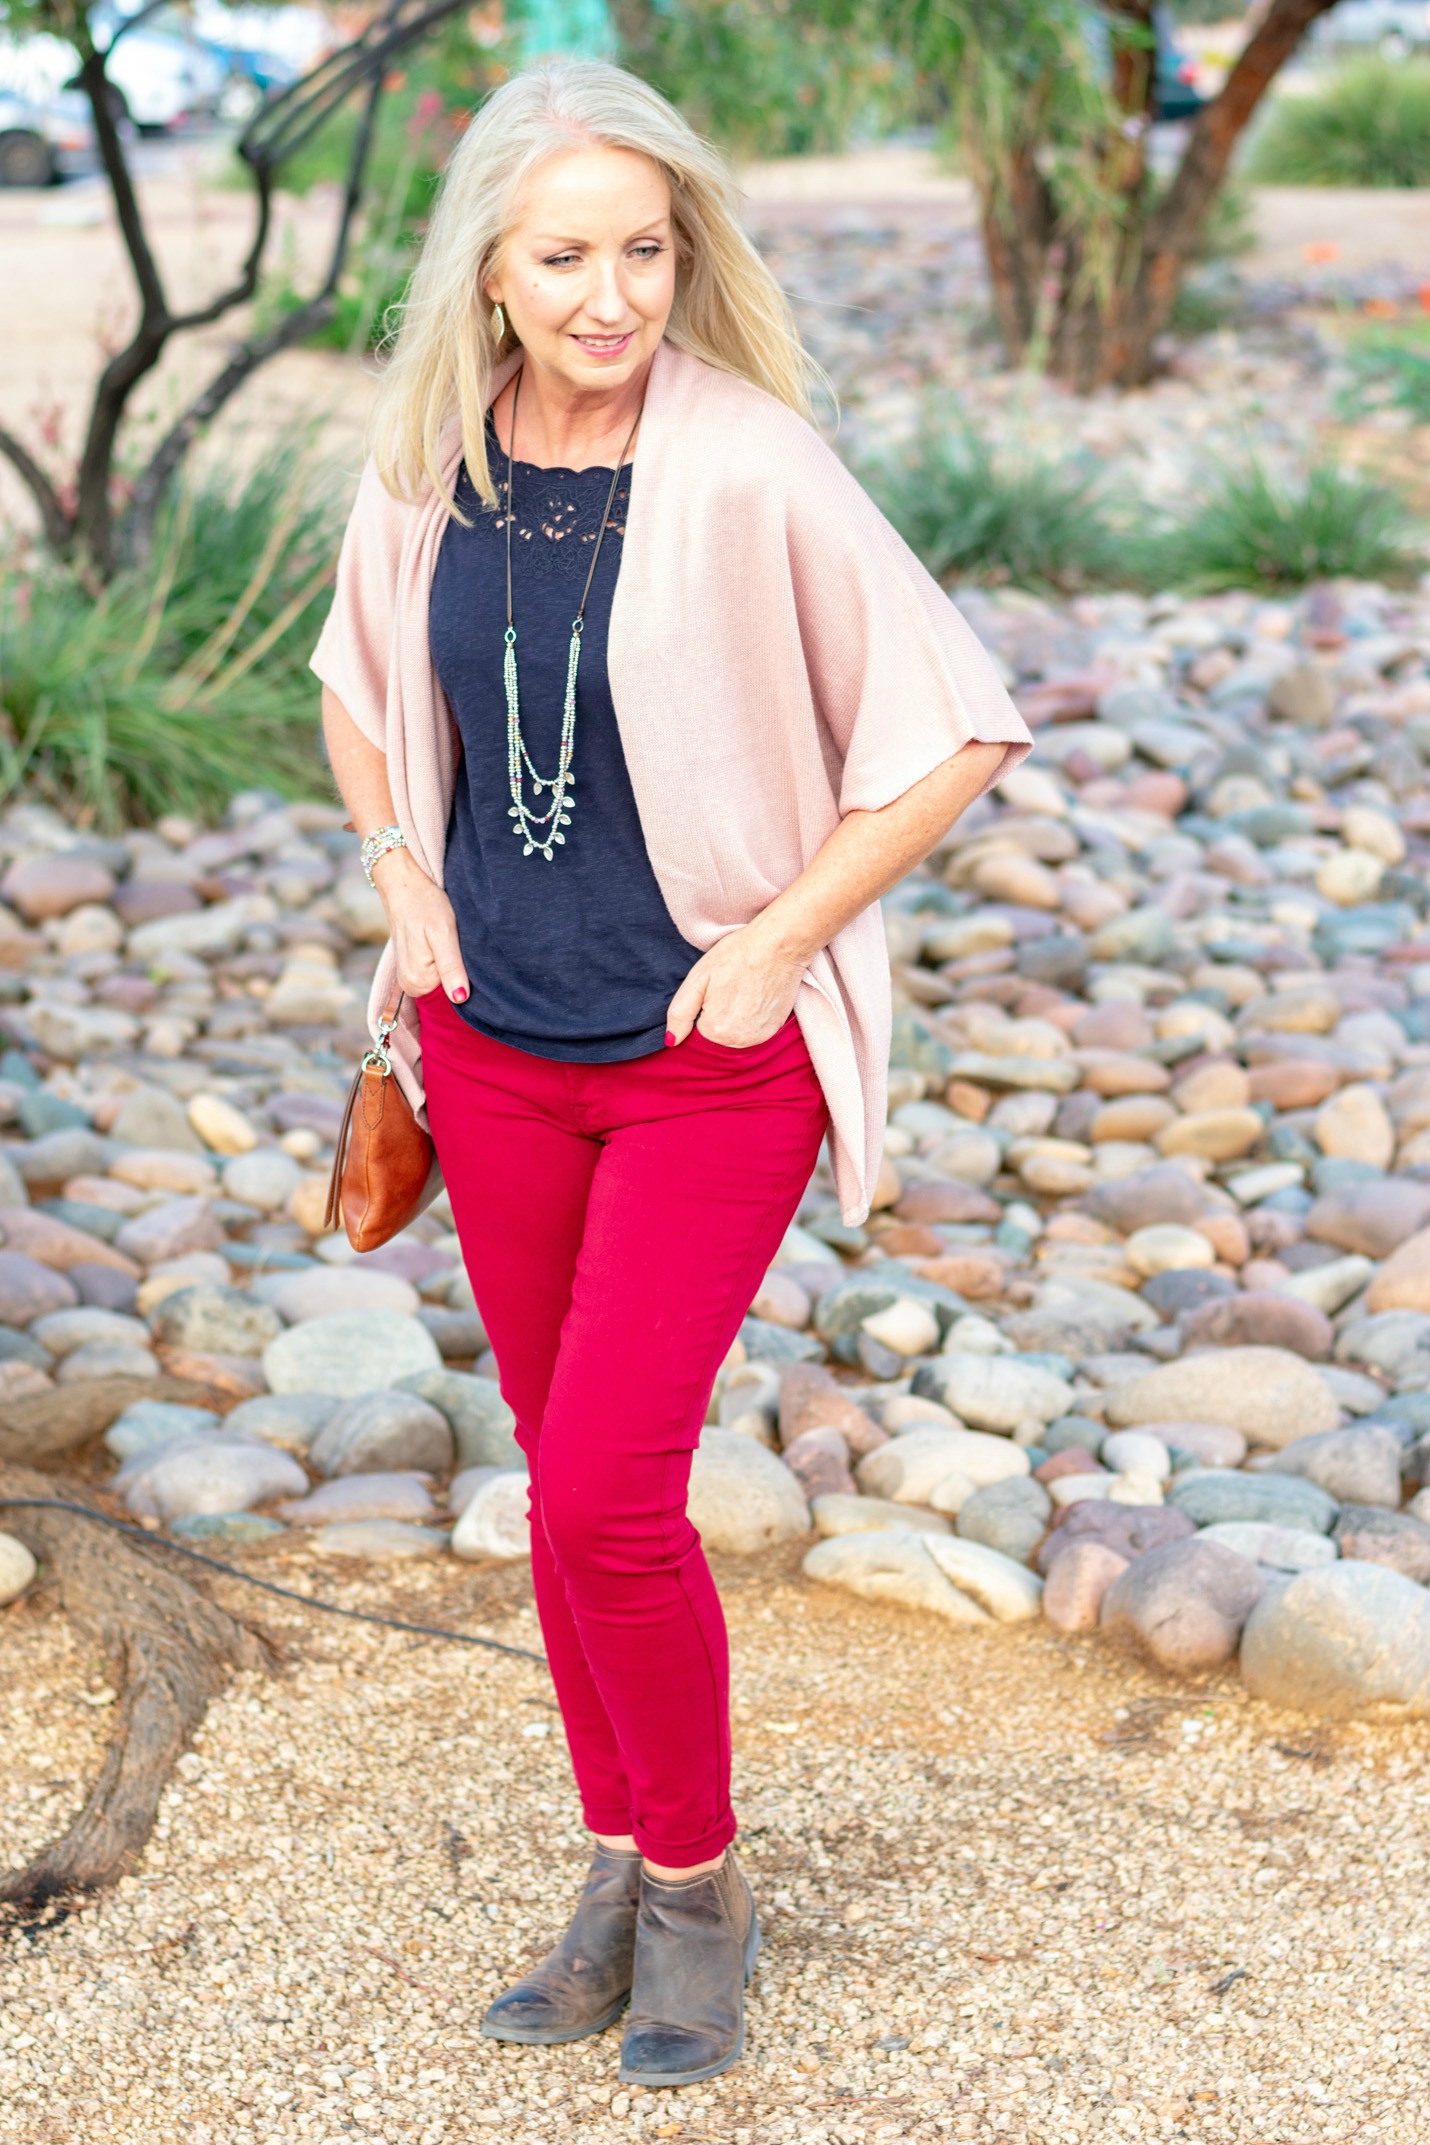 Dolman Sleeve Cardigan with Colored Jeans